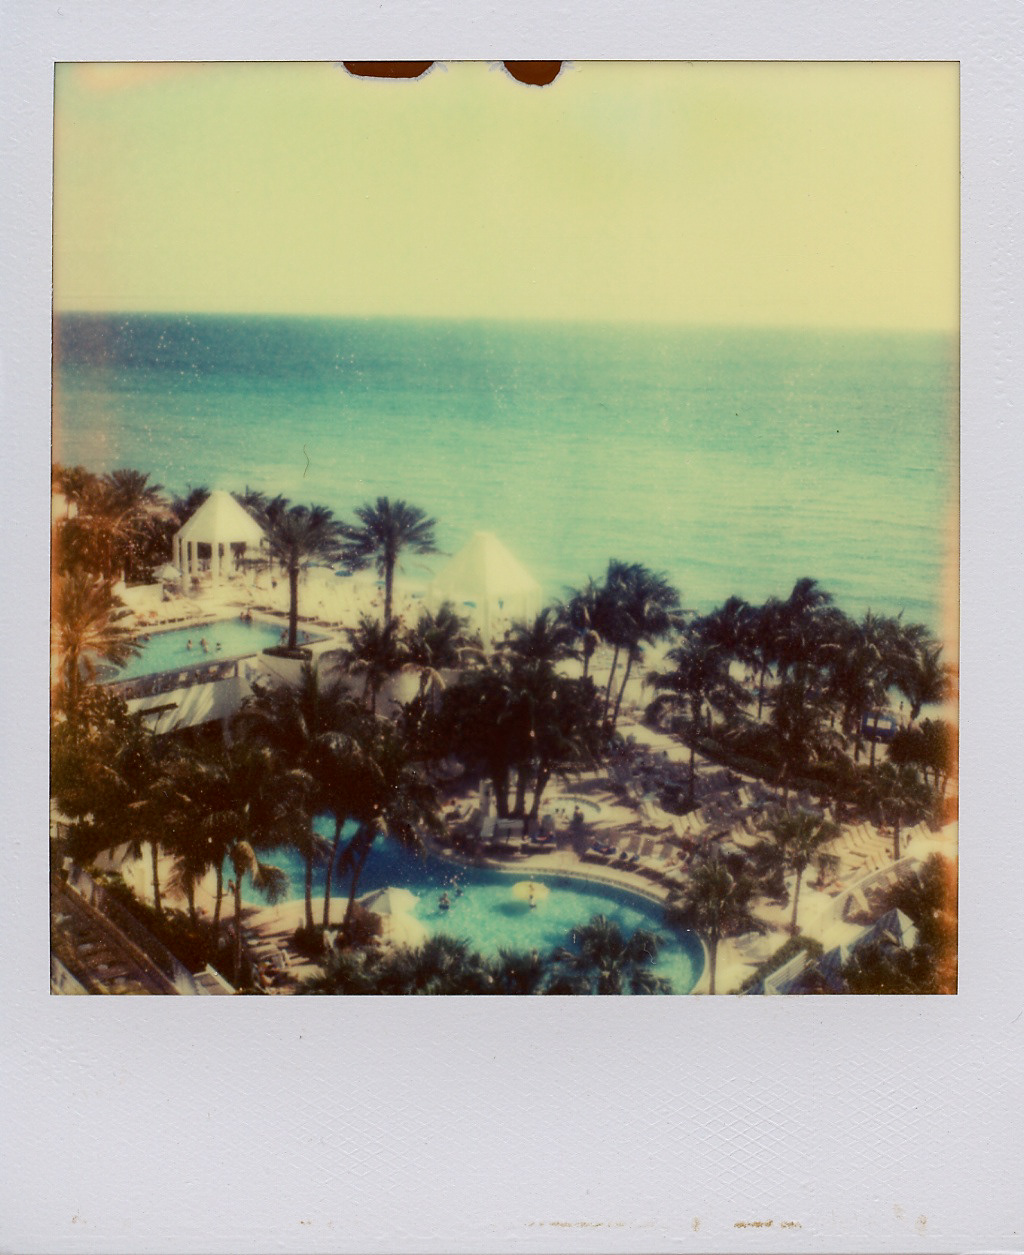 POLAROID impossible project px680 slr680 Analogue